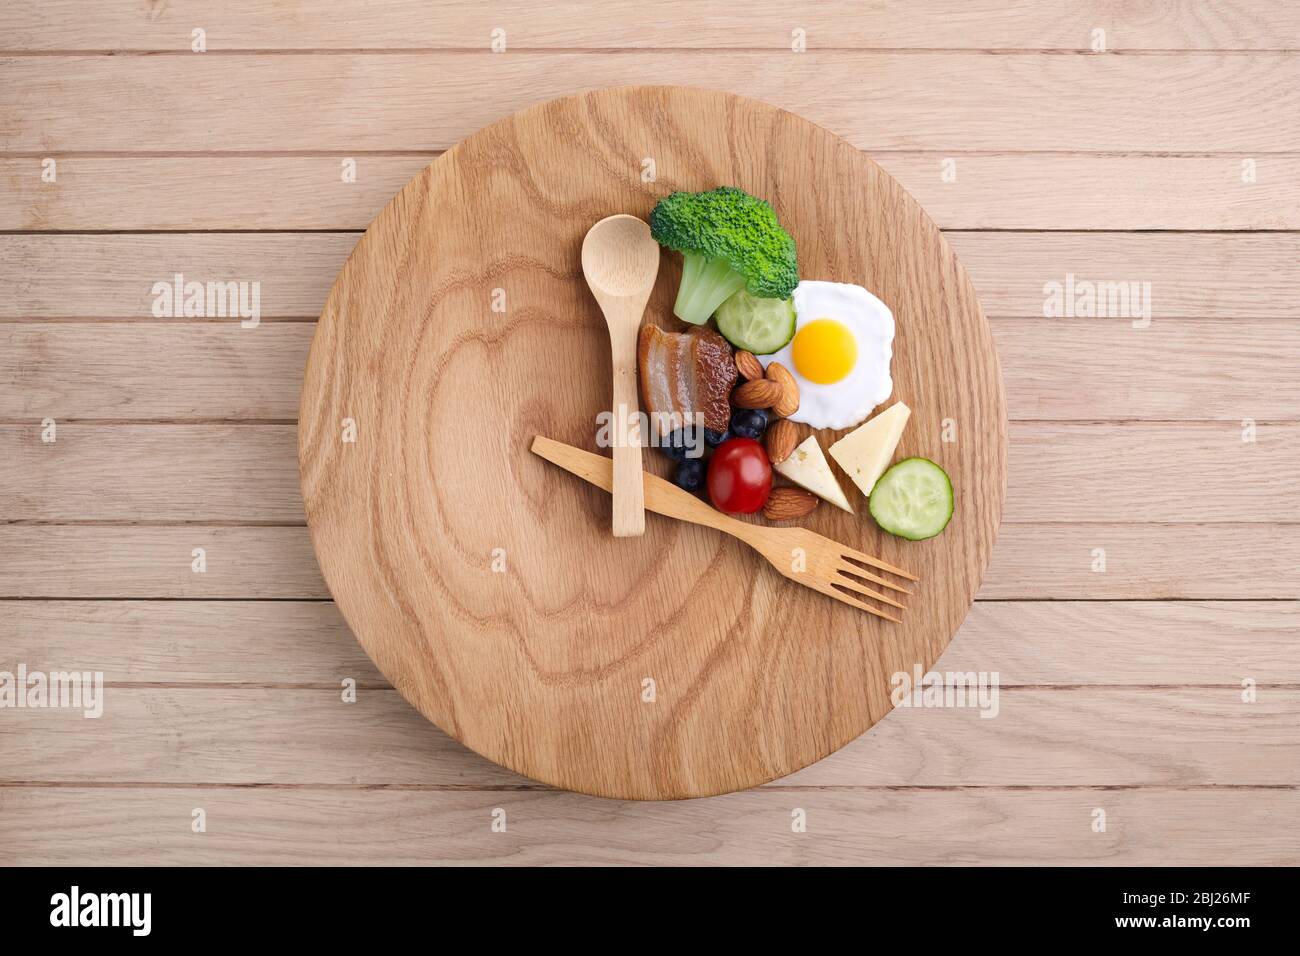 Intermittent fasting. Healthy breakfast, diet food concept. Organic meal. Fat loss concept. Weight loss. Stock Photo